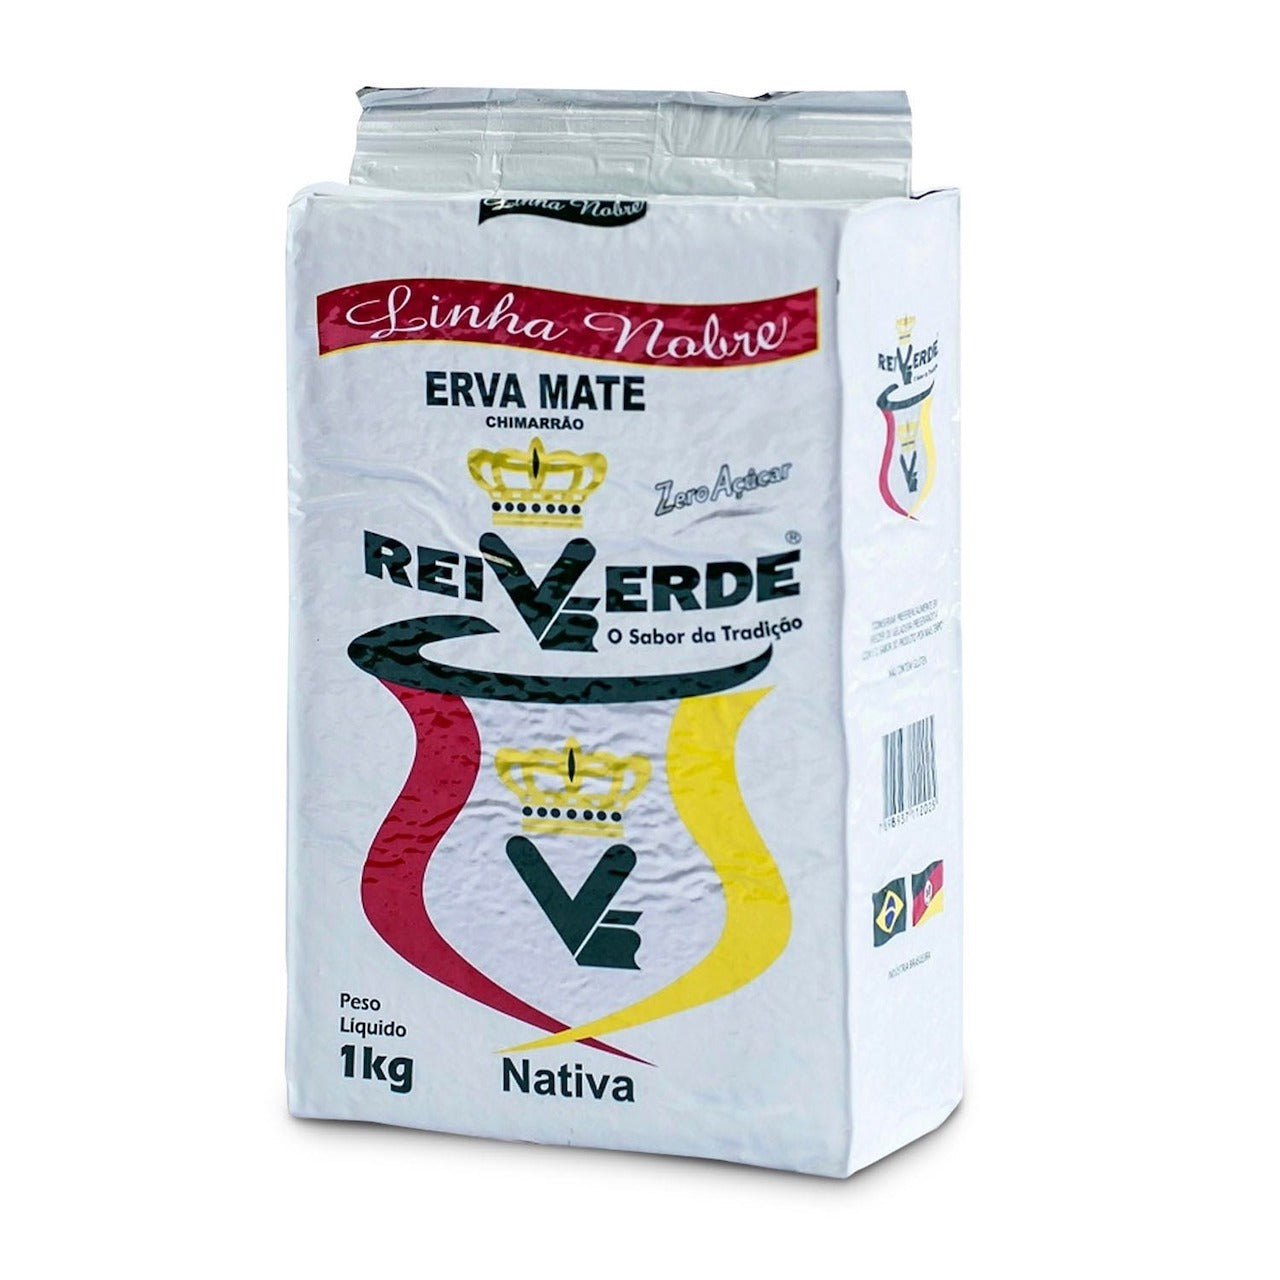 REI VERDE - Superior 1Kg - FINAL SALE - EXPIRED or CLOSE TO EXPIRY